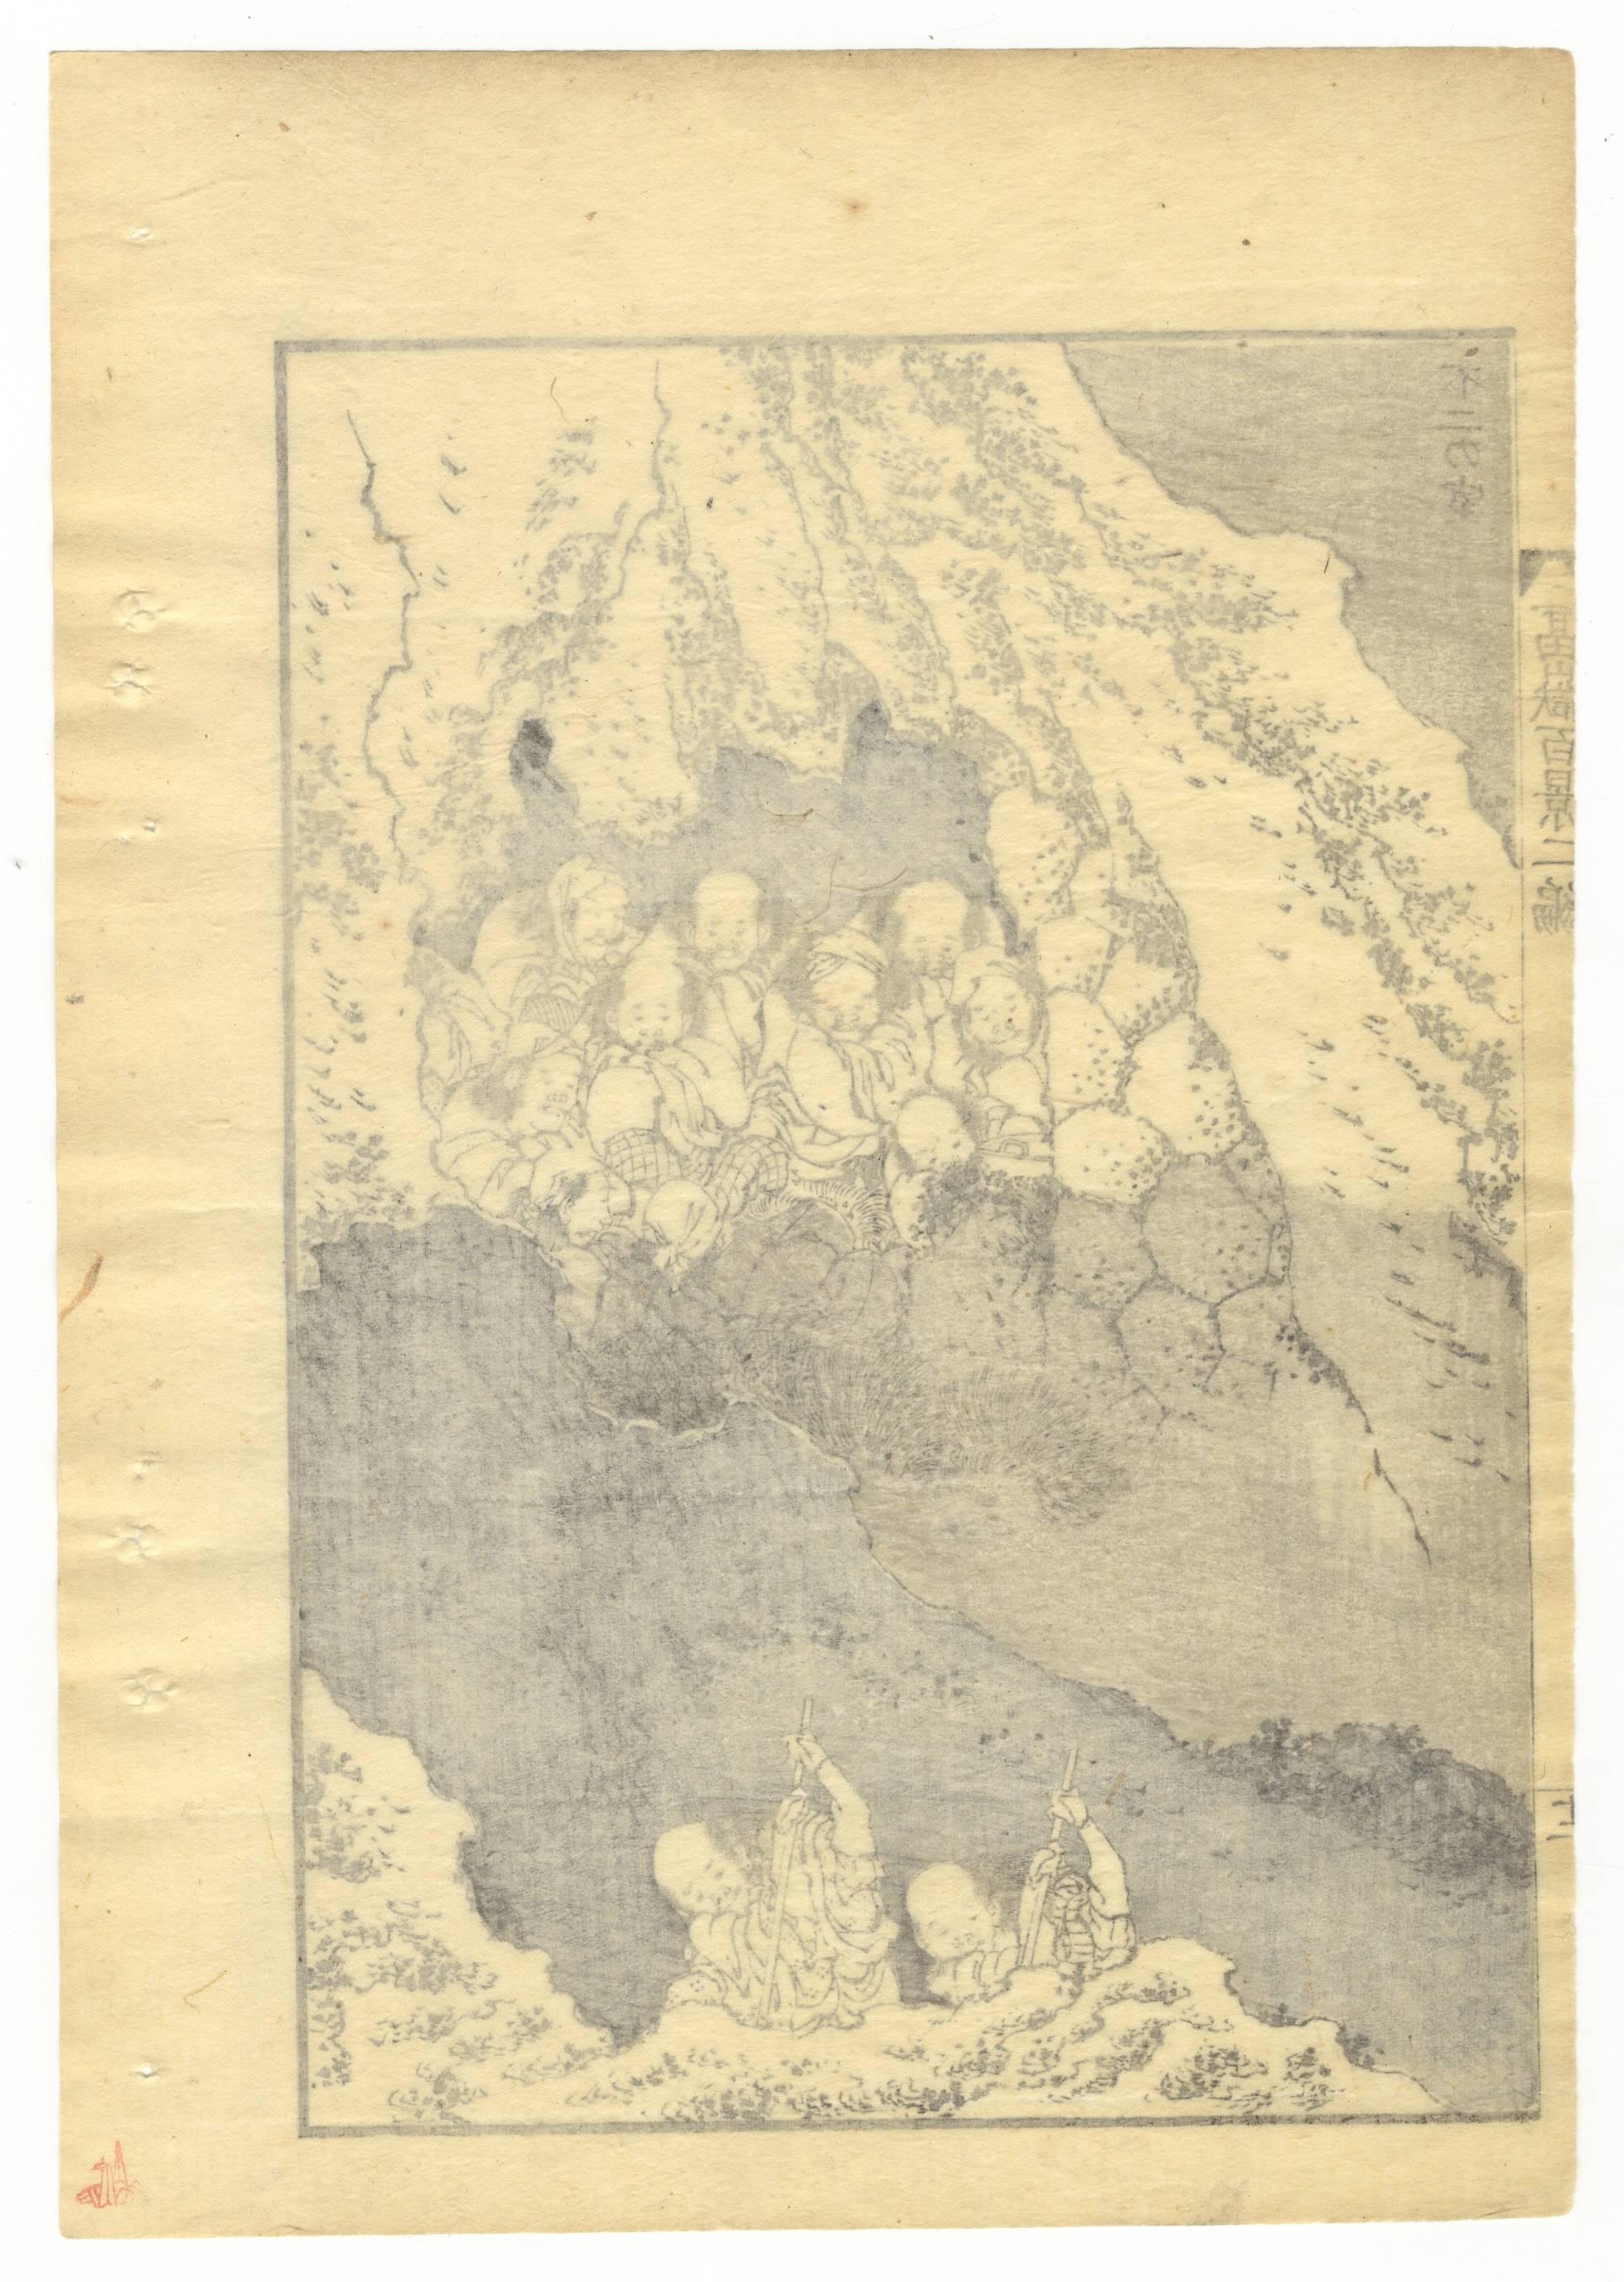 Hand-printed on traditional Japanese washi paper (mulberry tree paper).

Artist: Katsushika Hokusai
Title: Shelter of Fuji
Series: 100 views of Mt. Fuji, Volume 2
Publisher: Nishimuraya Yohachi

This print is from the series one hundred views